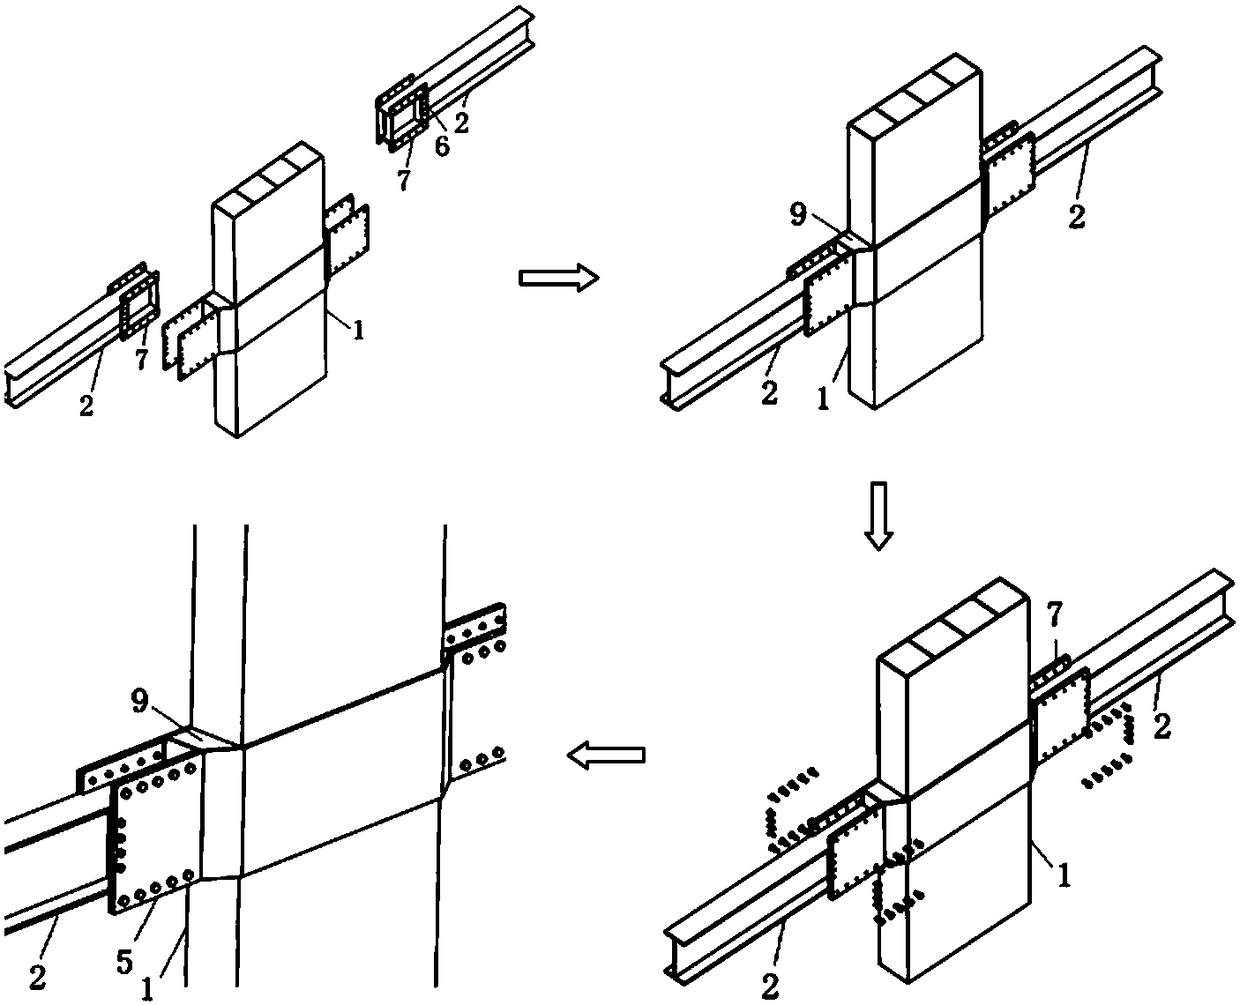 A bolt connection node and assembly method for eccentric beam-column